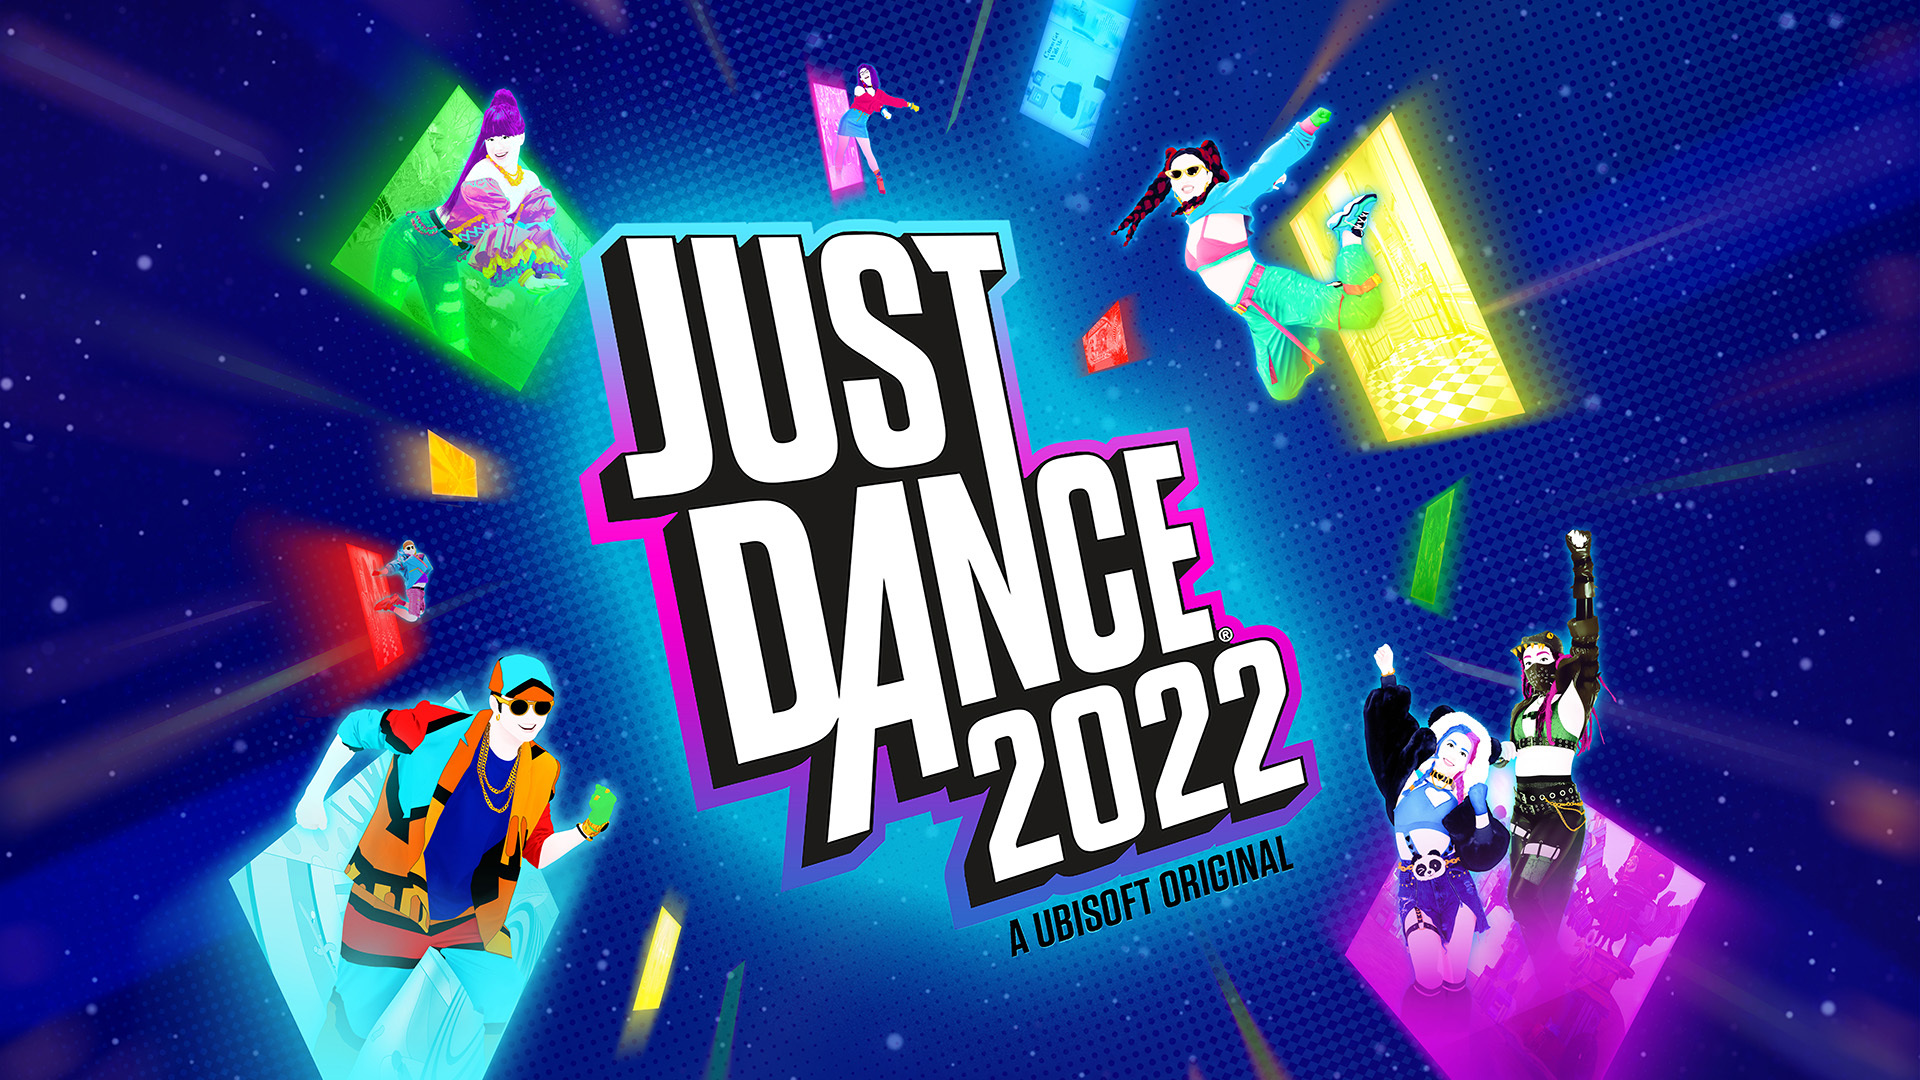 Just Dance 2022 announced for PlayStation, Xbox, Switch, and Stadia - EGM